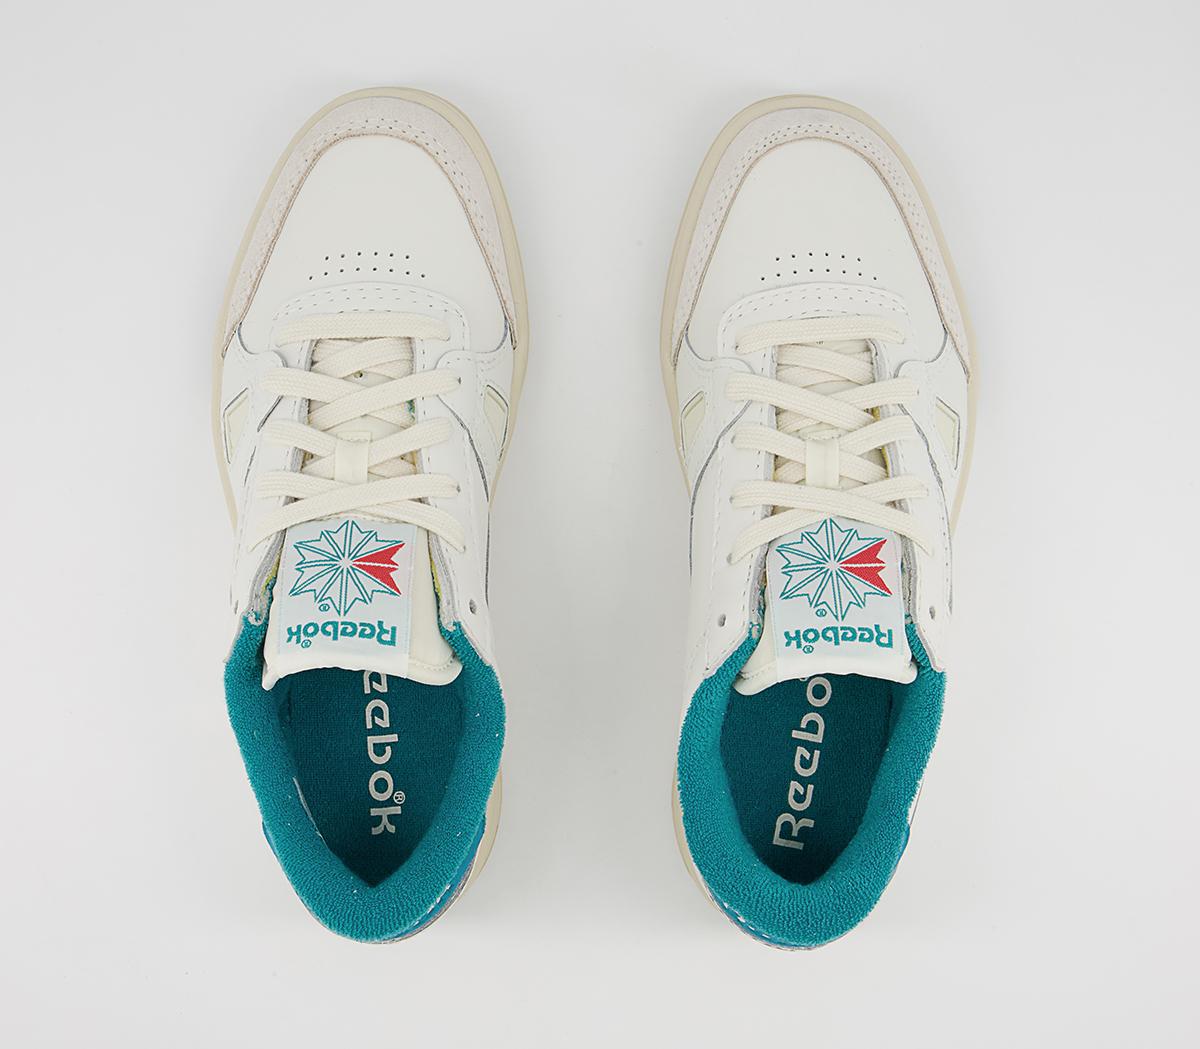 Reebok LT Court Trainers Chalk Seaport Teal Alabaster Hers trainers